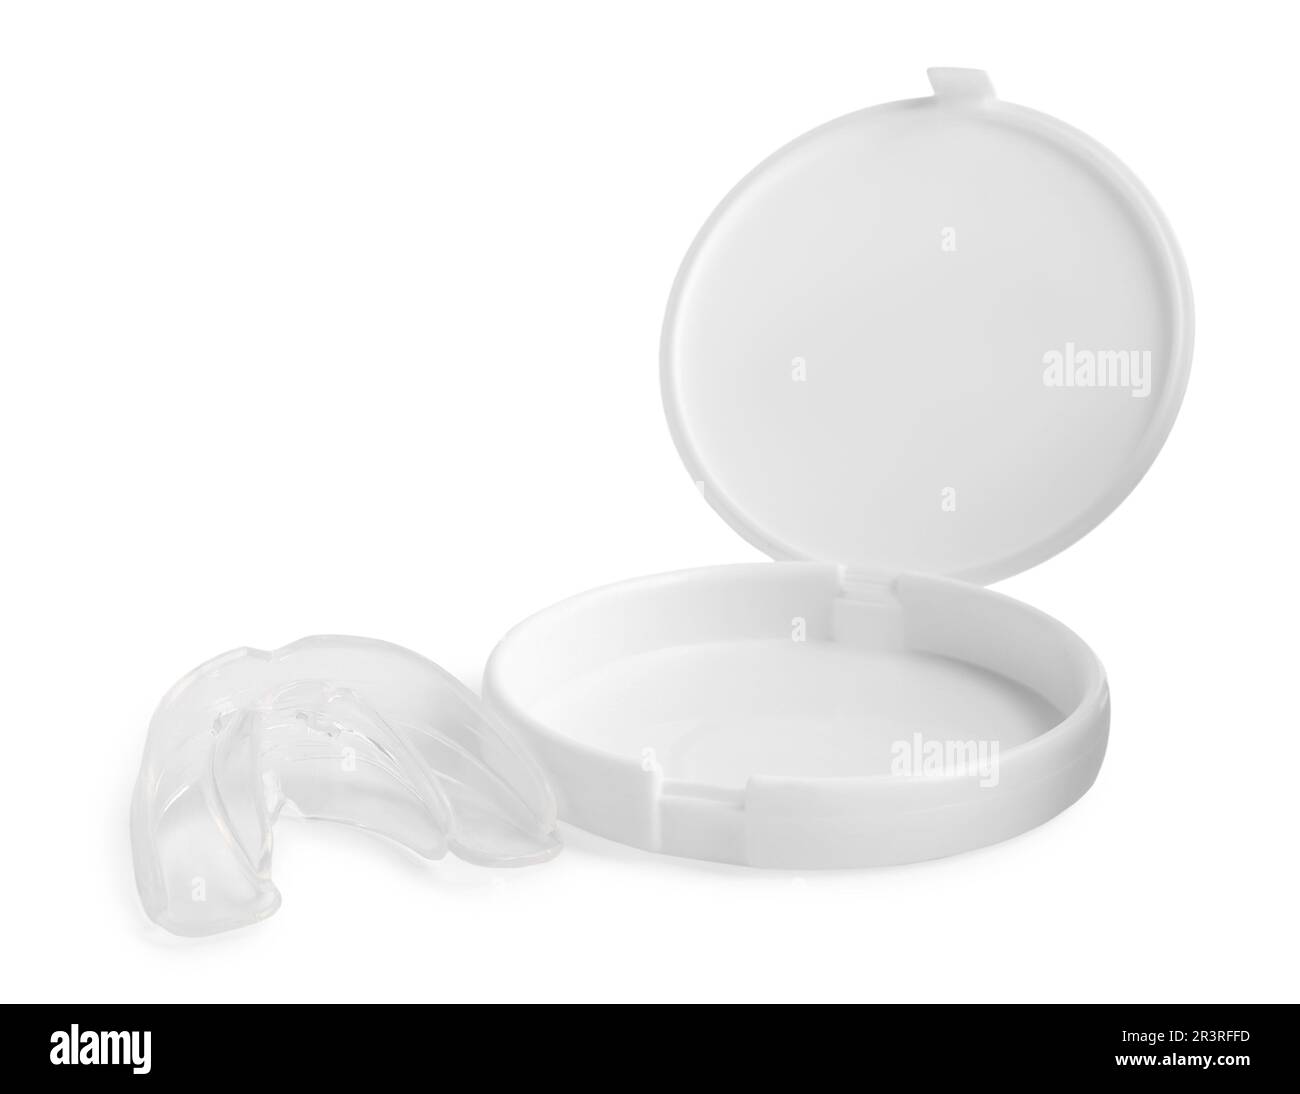 Transparent dental mouth guard and container on white background. Bite correction Stock Photo